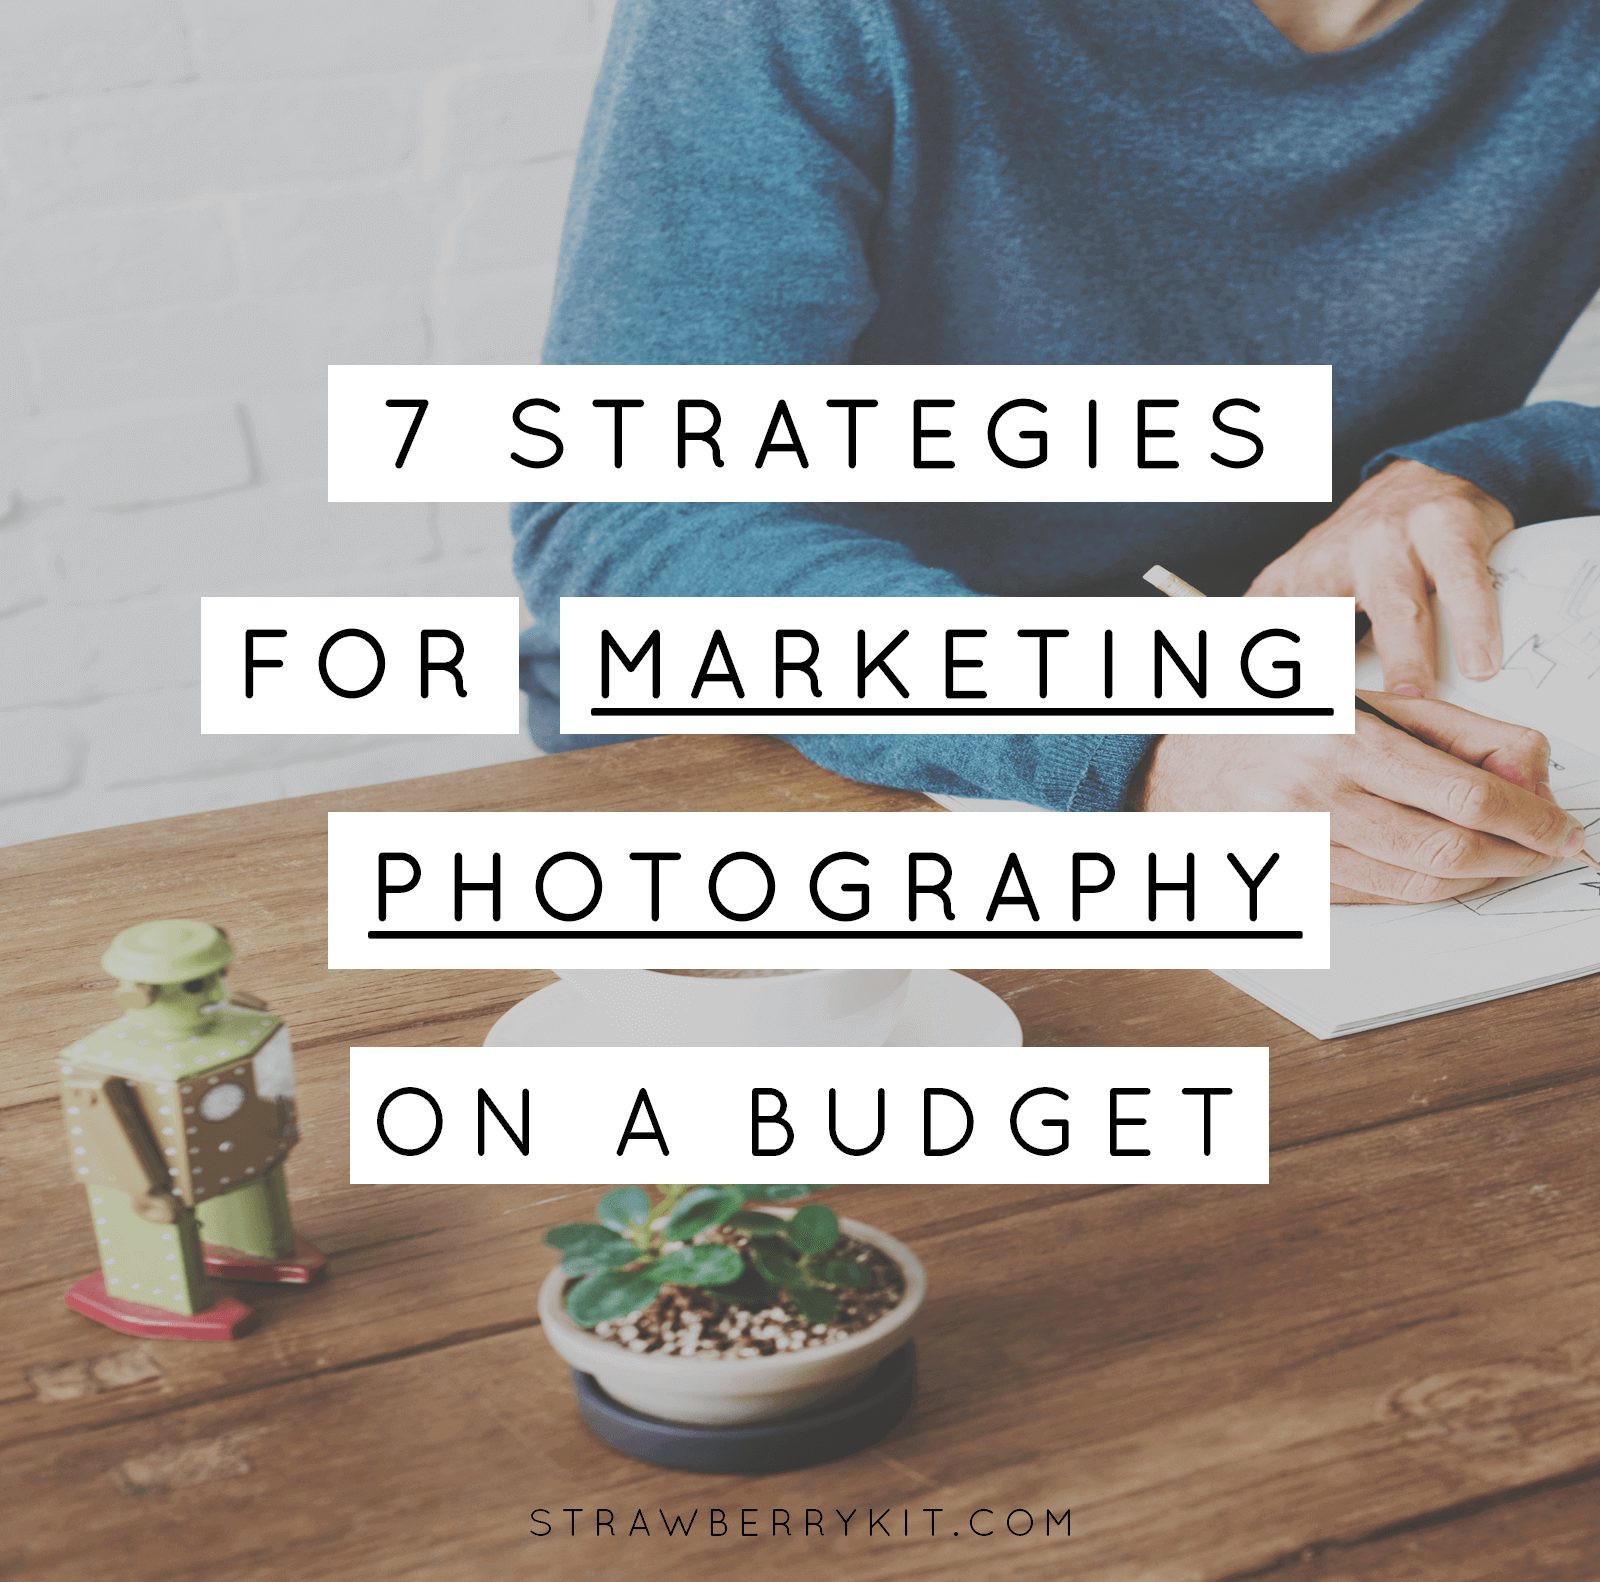 Marketing photography on a budget